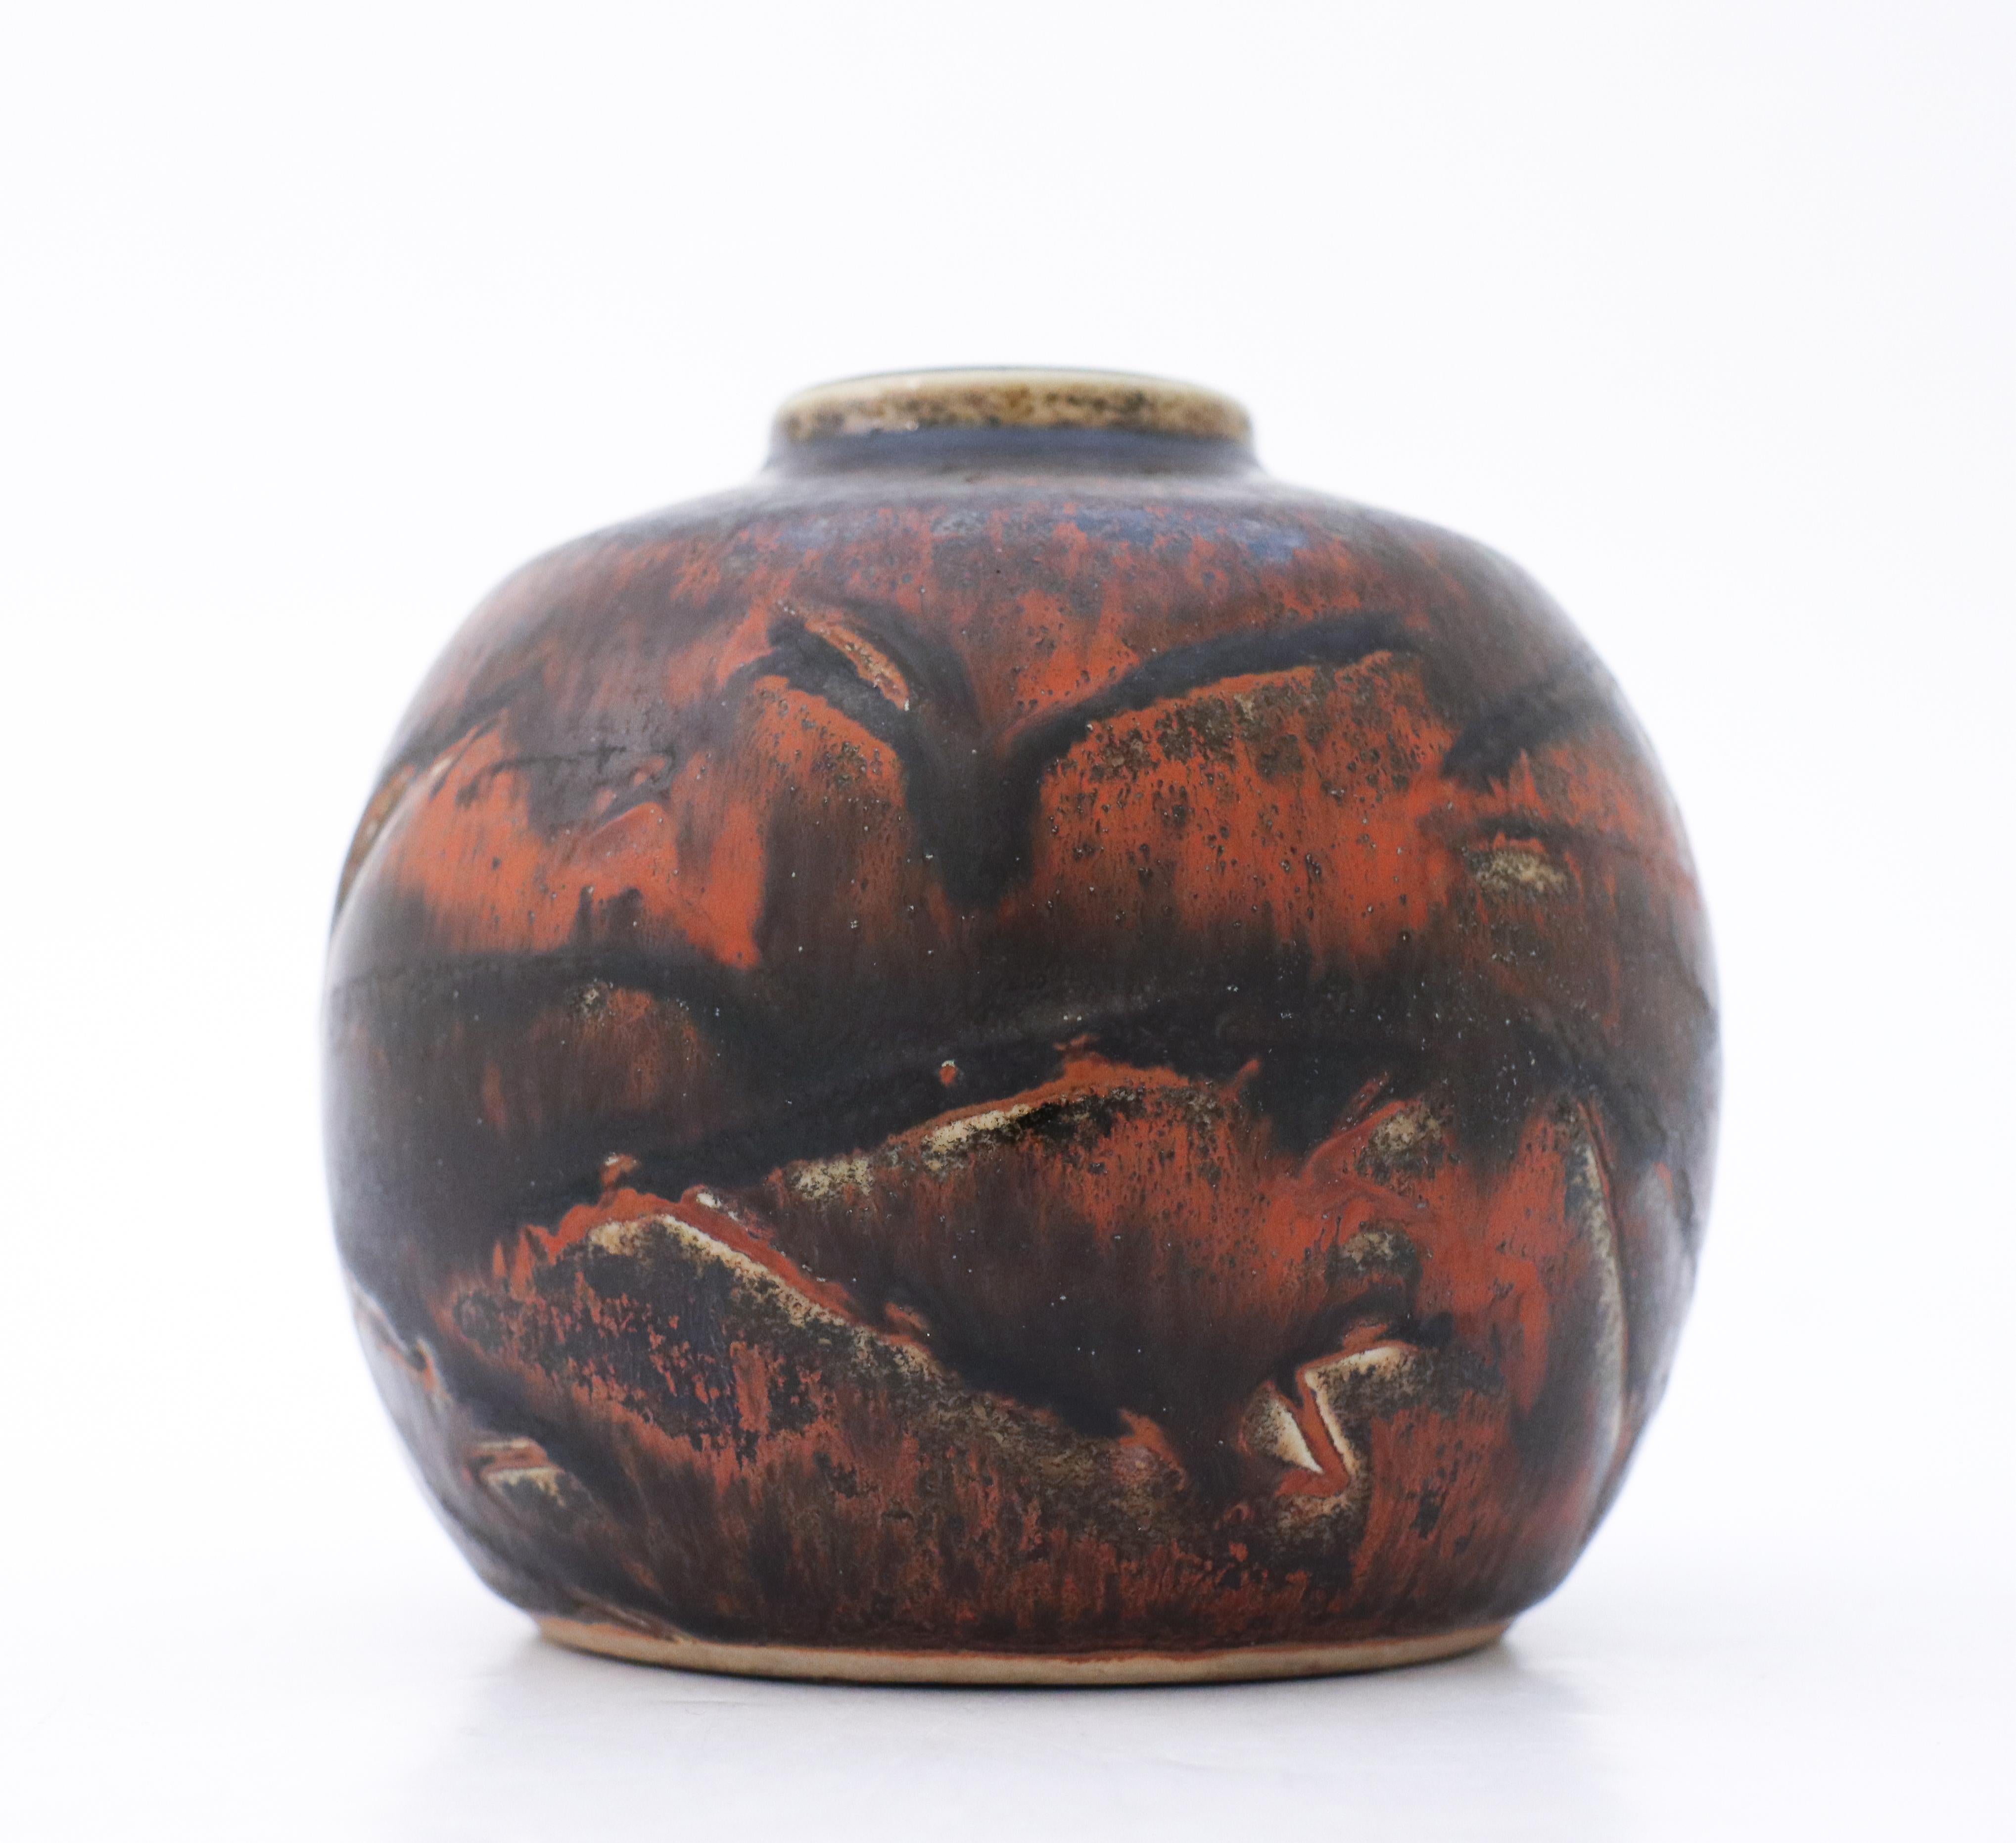 A lovely black and brown vase designed by Carl-Harry Stålhane at Rörstrand Atelier, it´s 10.5 cm (4.2